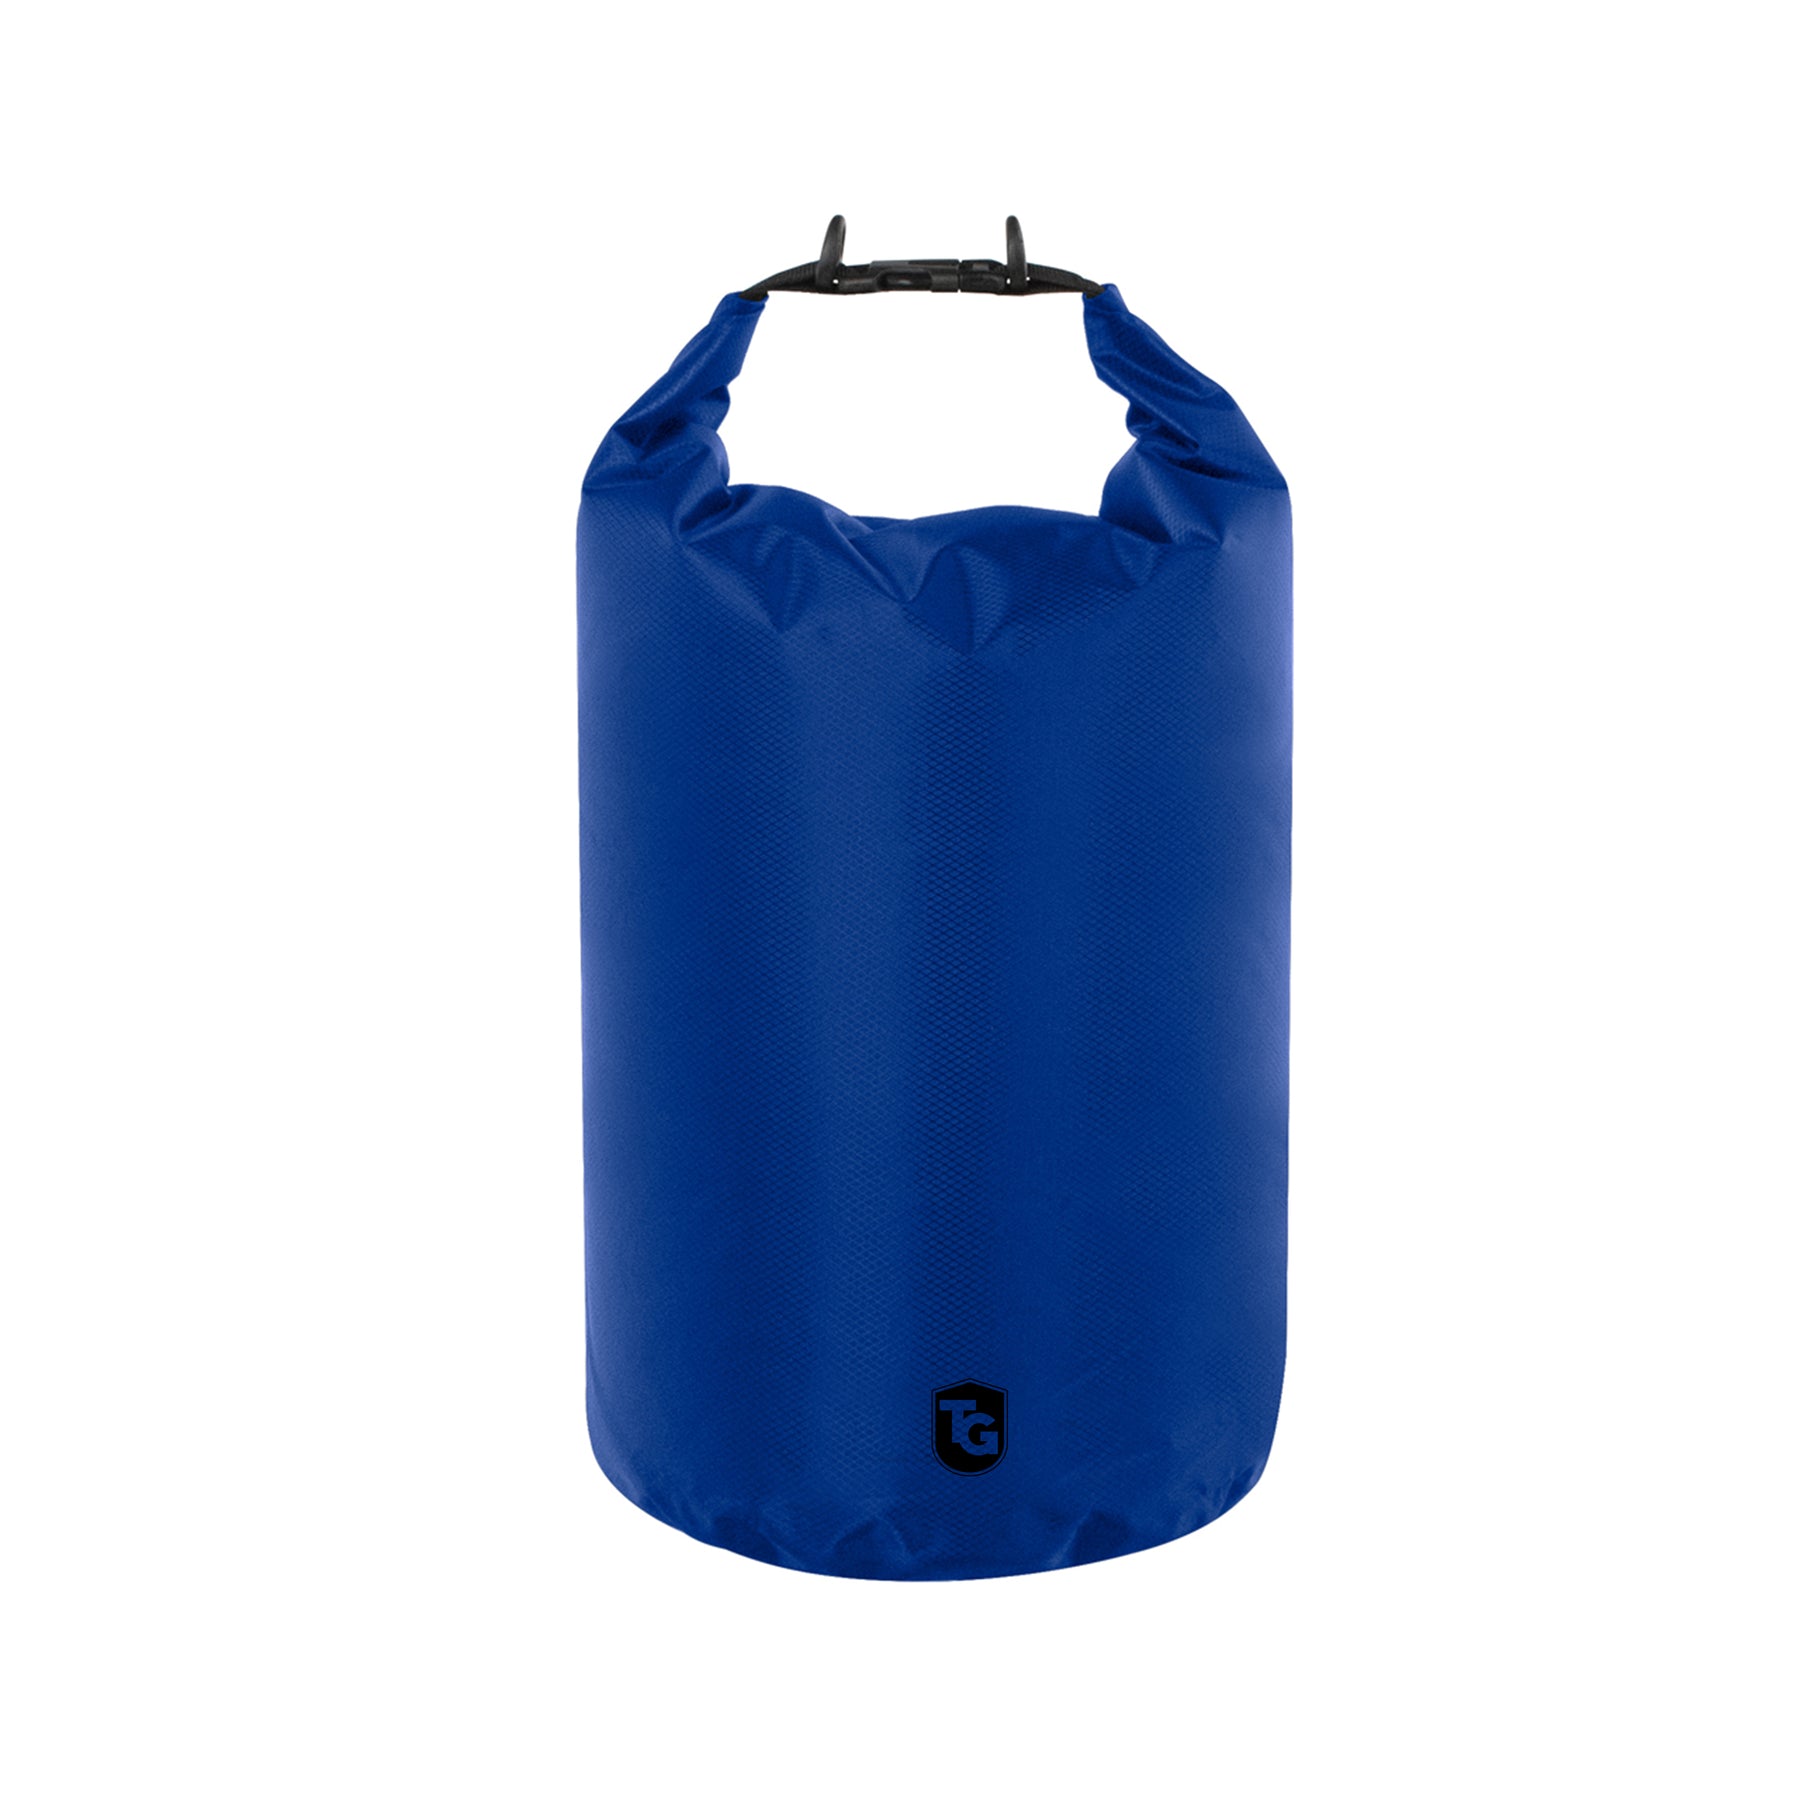 TrailGear 10 liter Heavy-Duty Dry Bag in the royal blue variation.